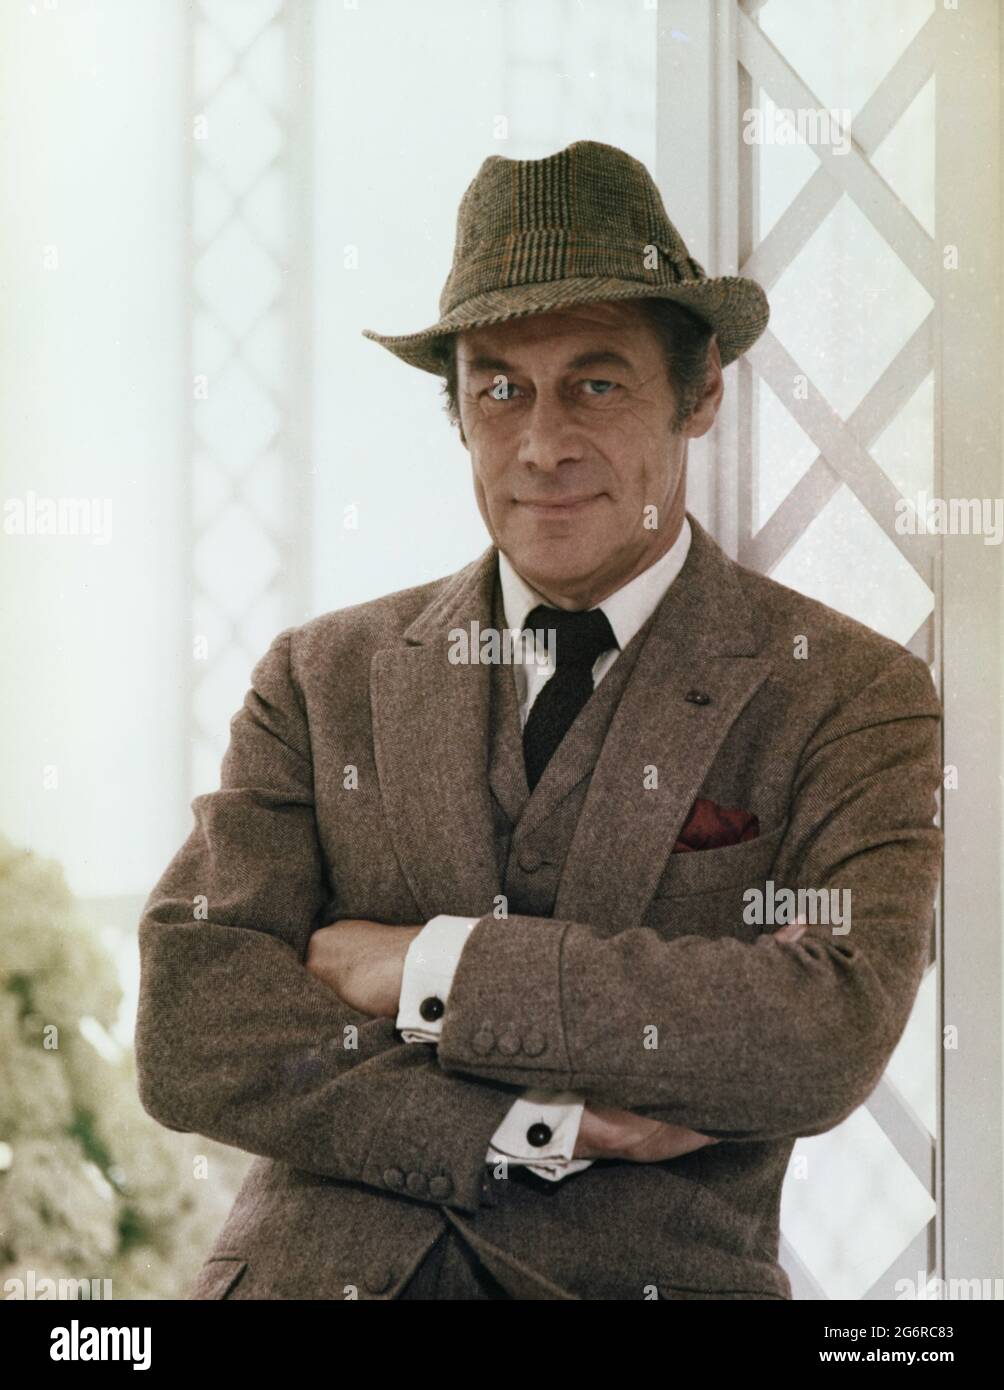 REX HARRISON Colour Portrait as Professor Henry Higgins in MY FAIR LADY 1964 director GEORGE CUKOR from the Broadway musical adapted from the play Pygmalion by George Bernard Shaw screenplay book and lyrics Alan Jay Lerner  music Frederick Loewe production design and costumes Cecil Beaton producer Jack L.Warner Warner Bros. Stock Photo